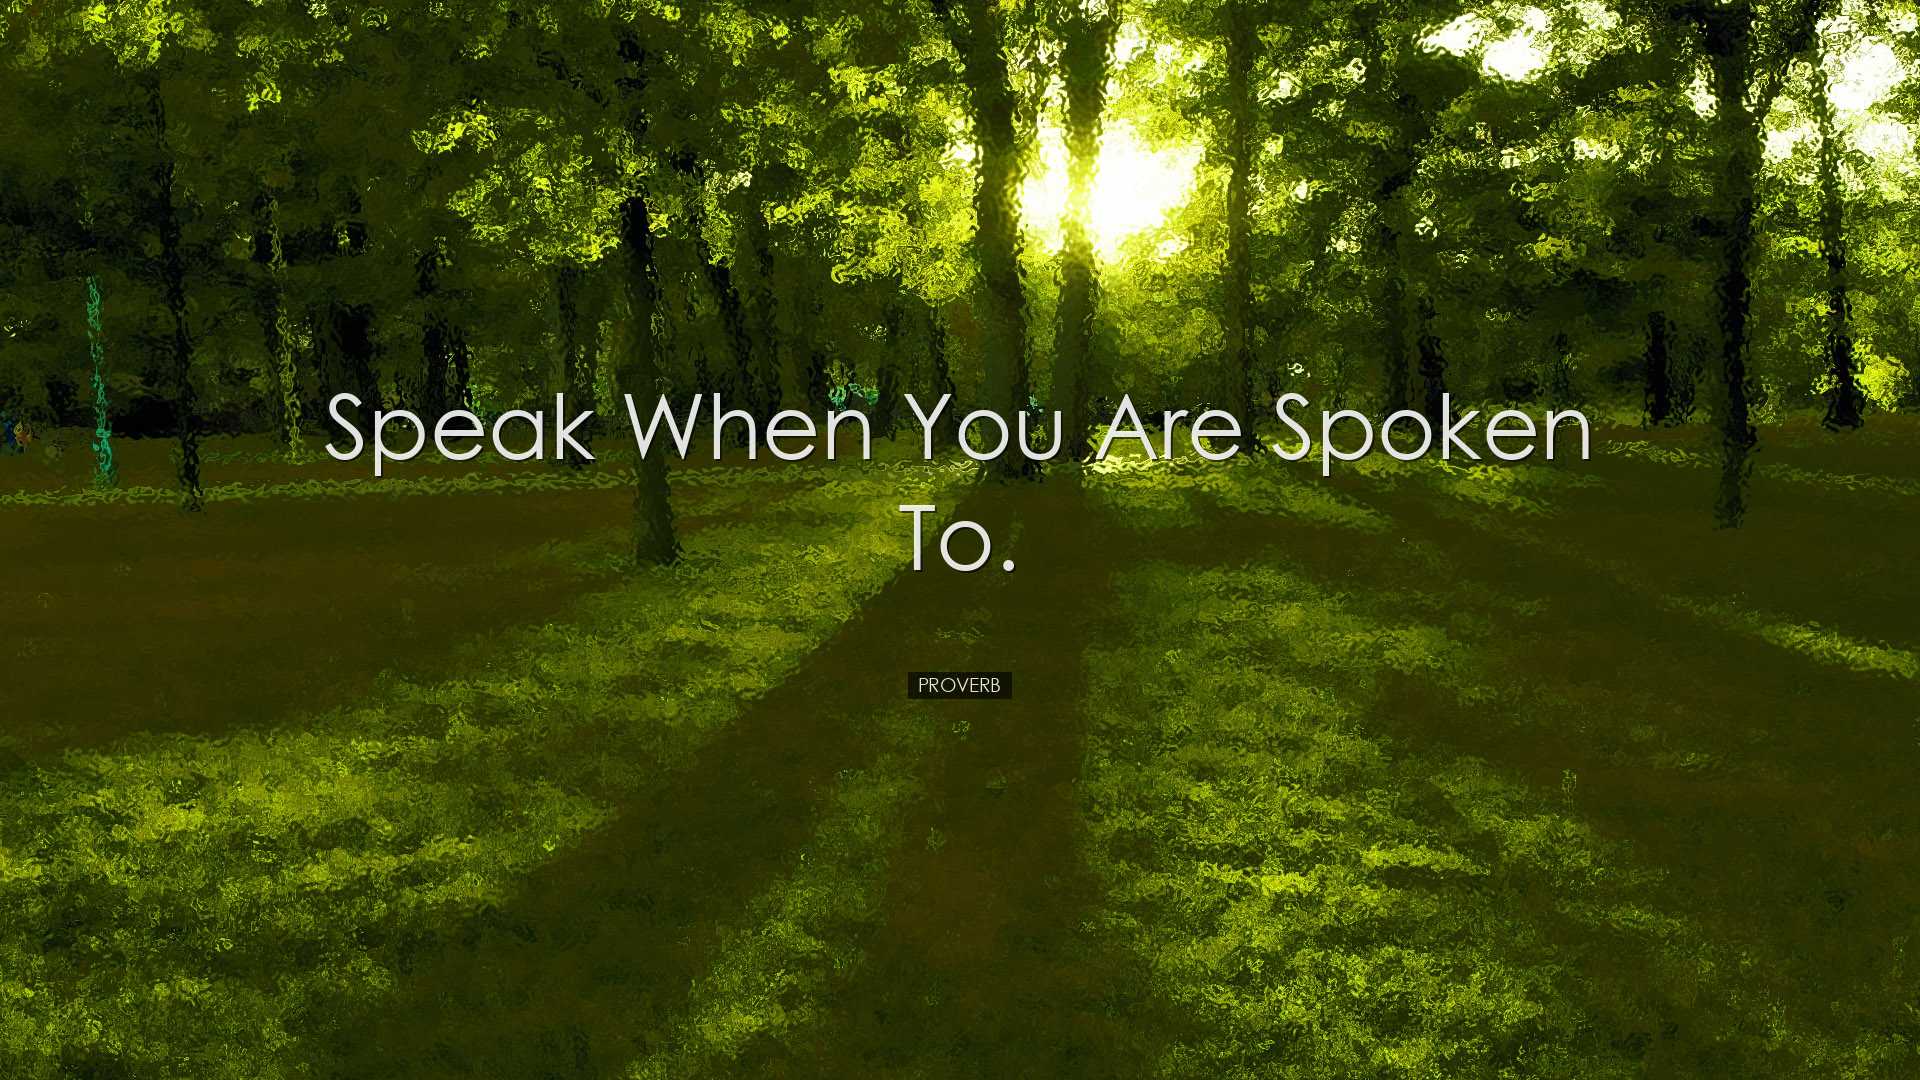 Speak when you are spoken to. - Proverb